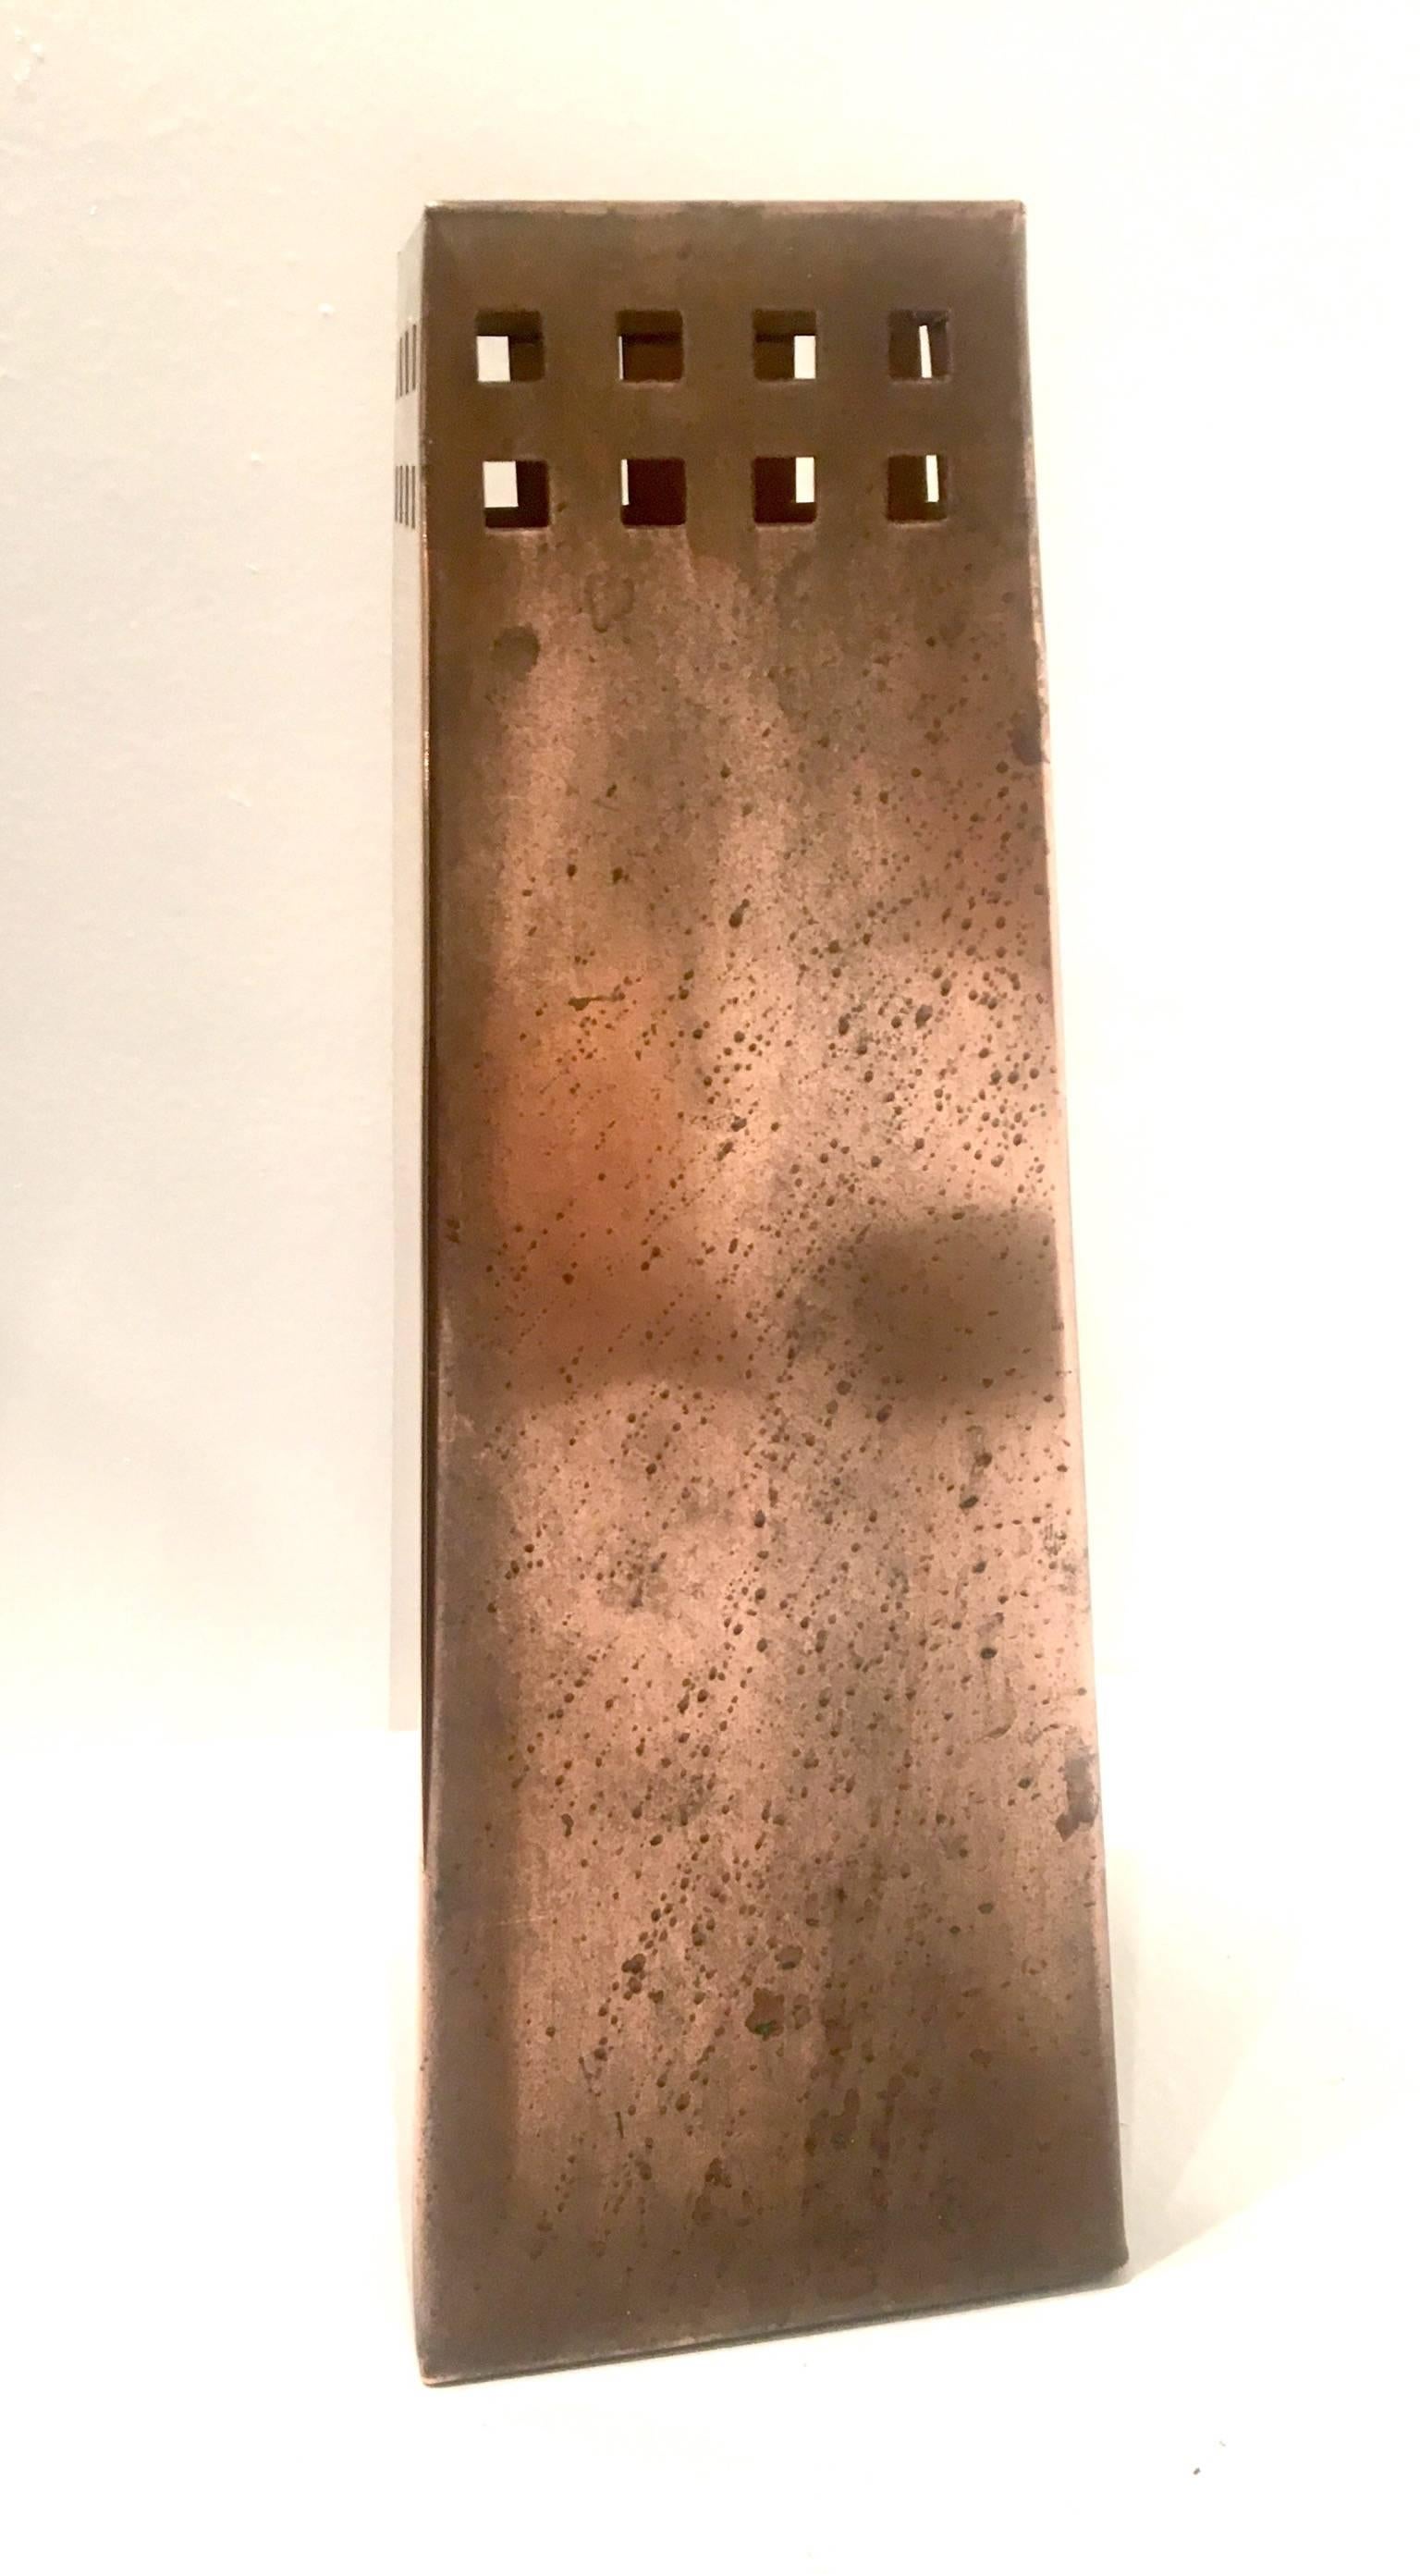 Rare solid perforated patinated copper vase, circa 1991 in the style of Roycroft Trapezoide vase made in Berkley and signed at the bottom by Verdigris copper works Berkley 1991.